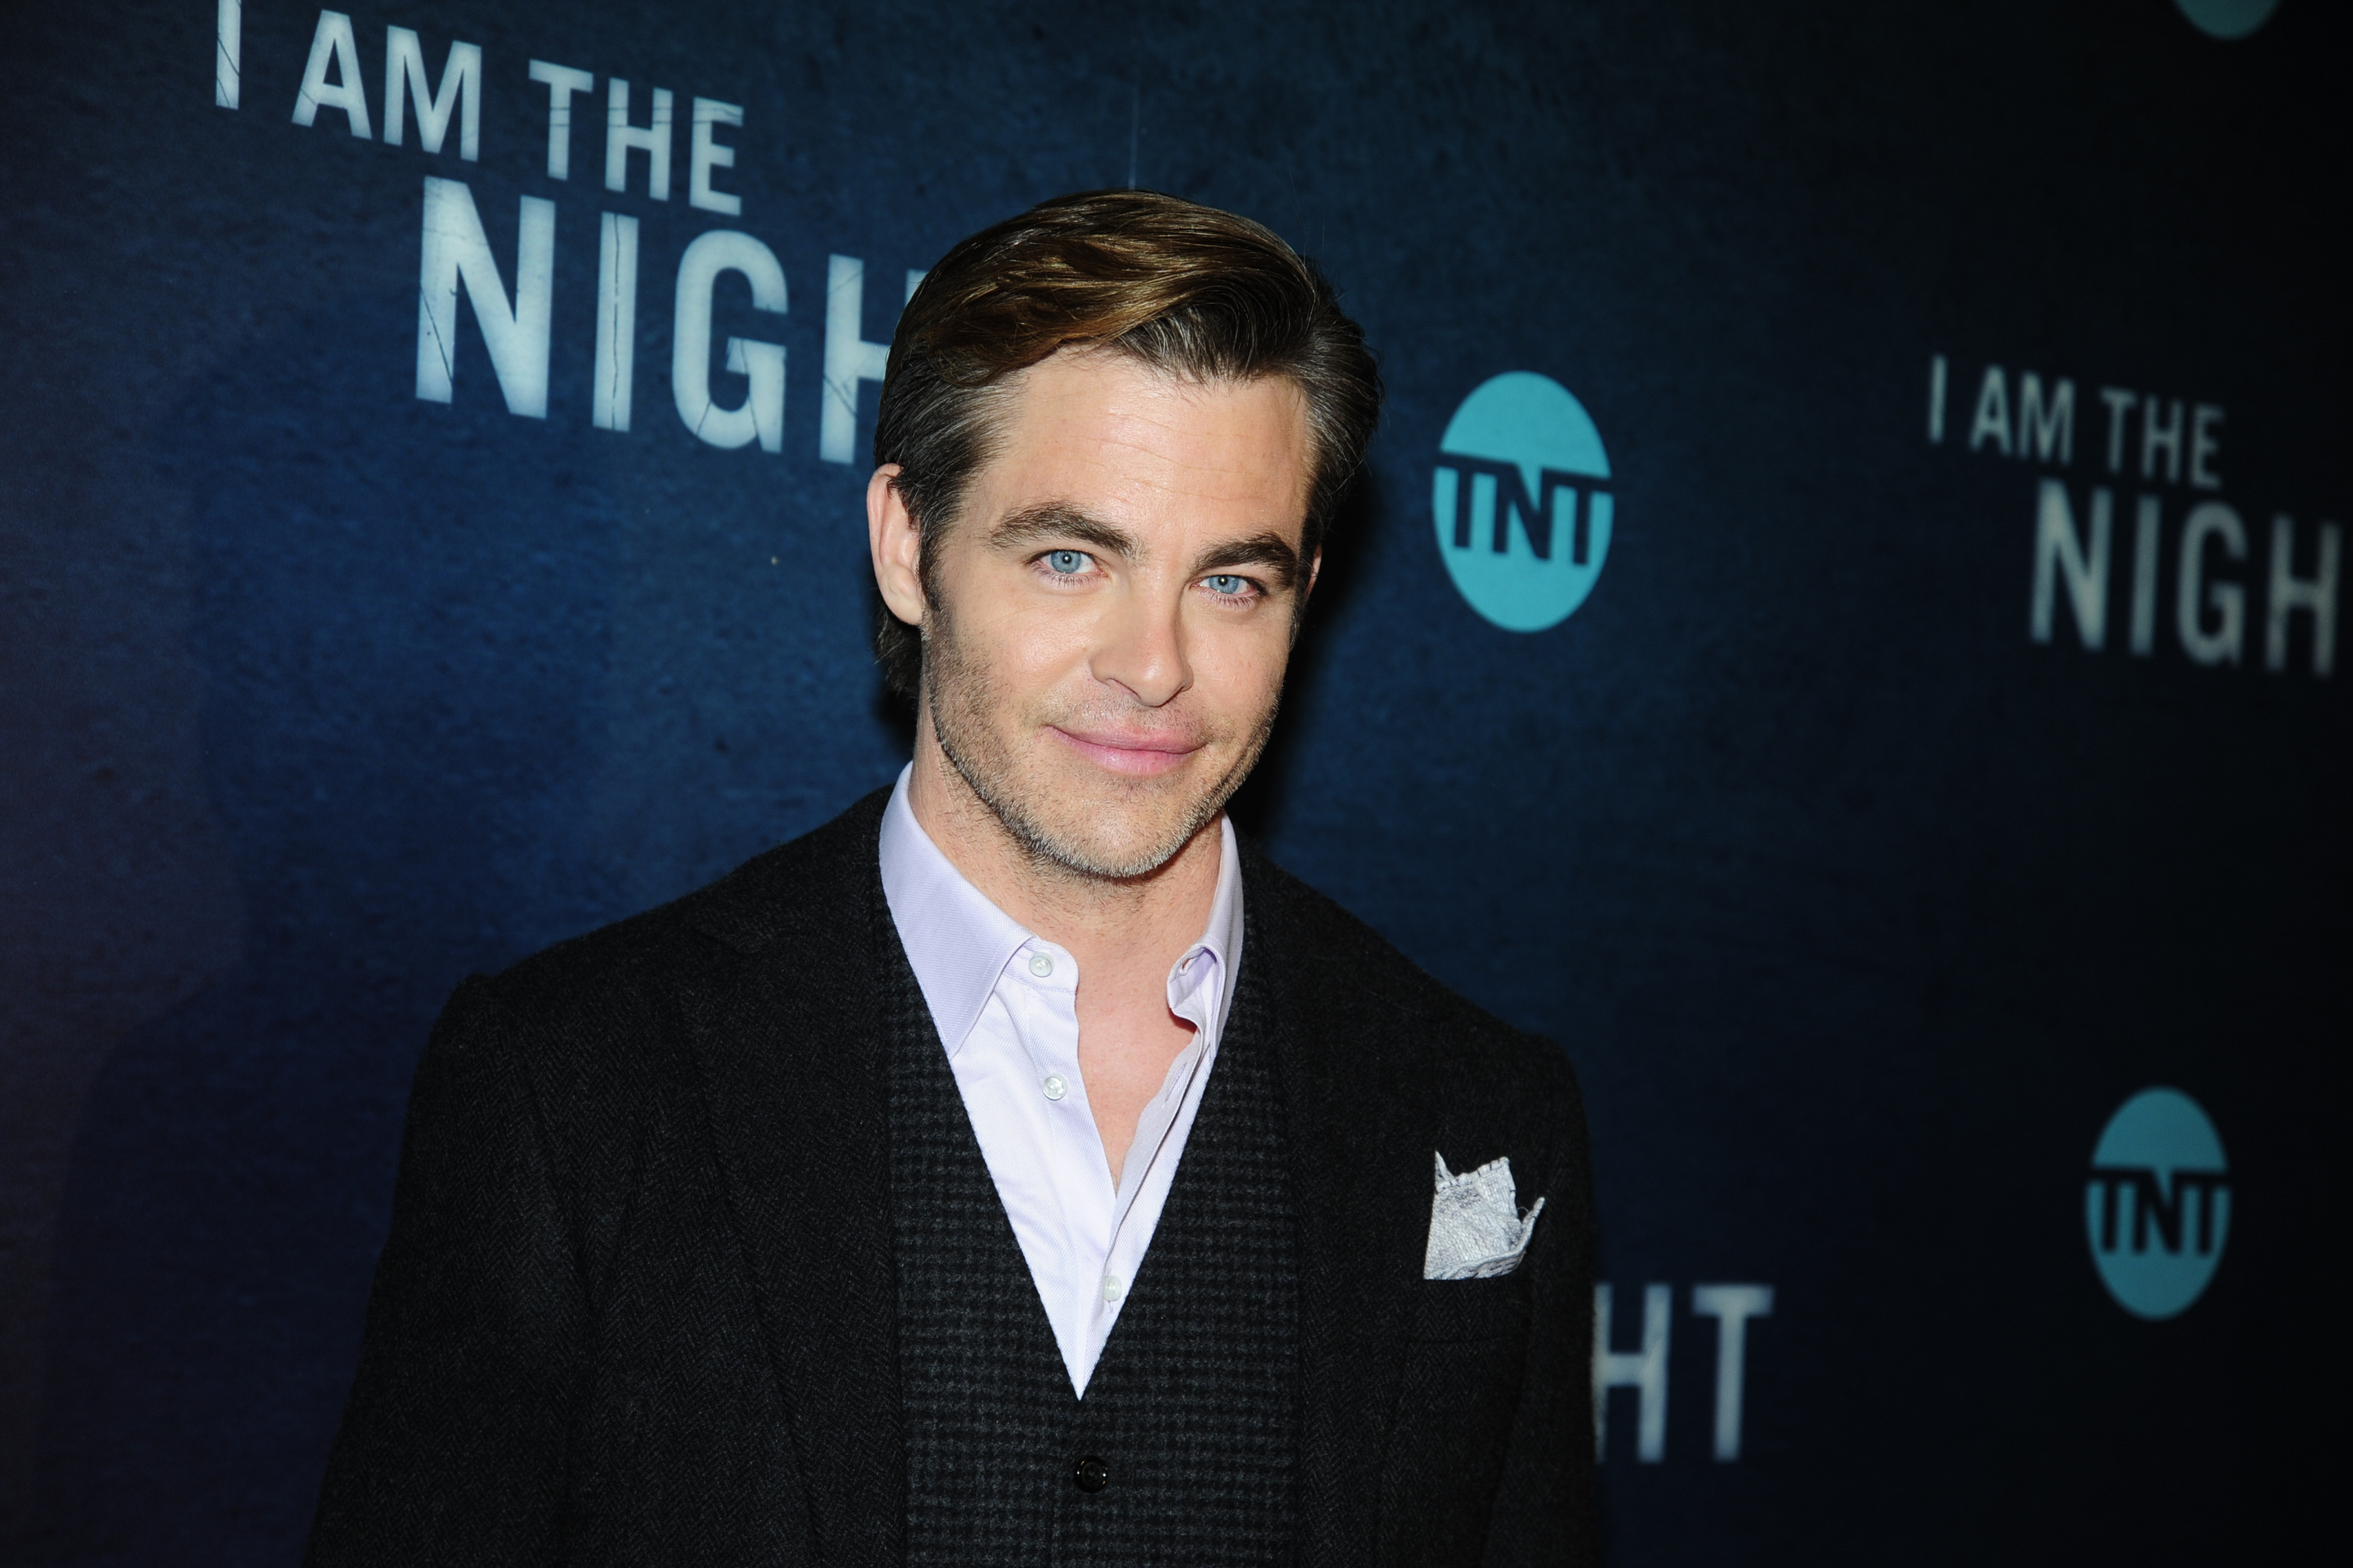 Chris Pine during the New York Premiere Of TNT's "I Am the Night" at Metrograph on January 22, 2019, in New York City. | Source: Getty Images